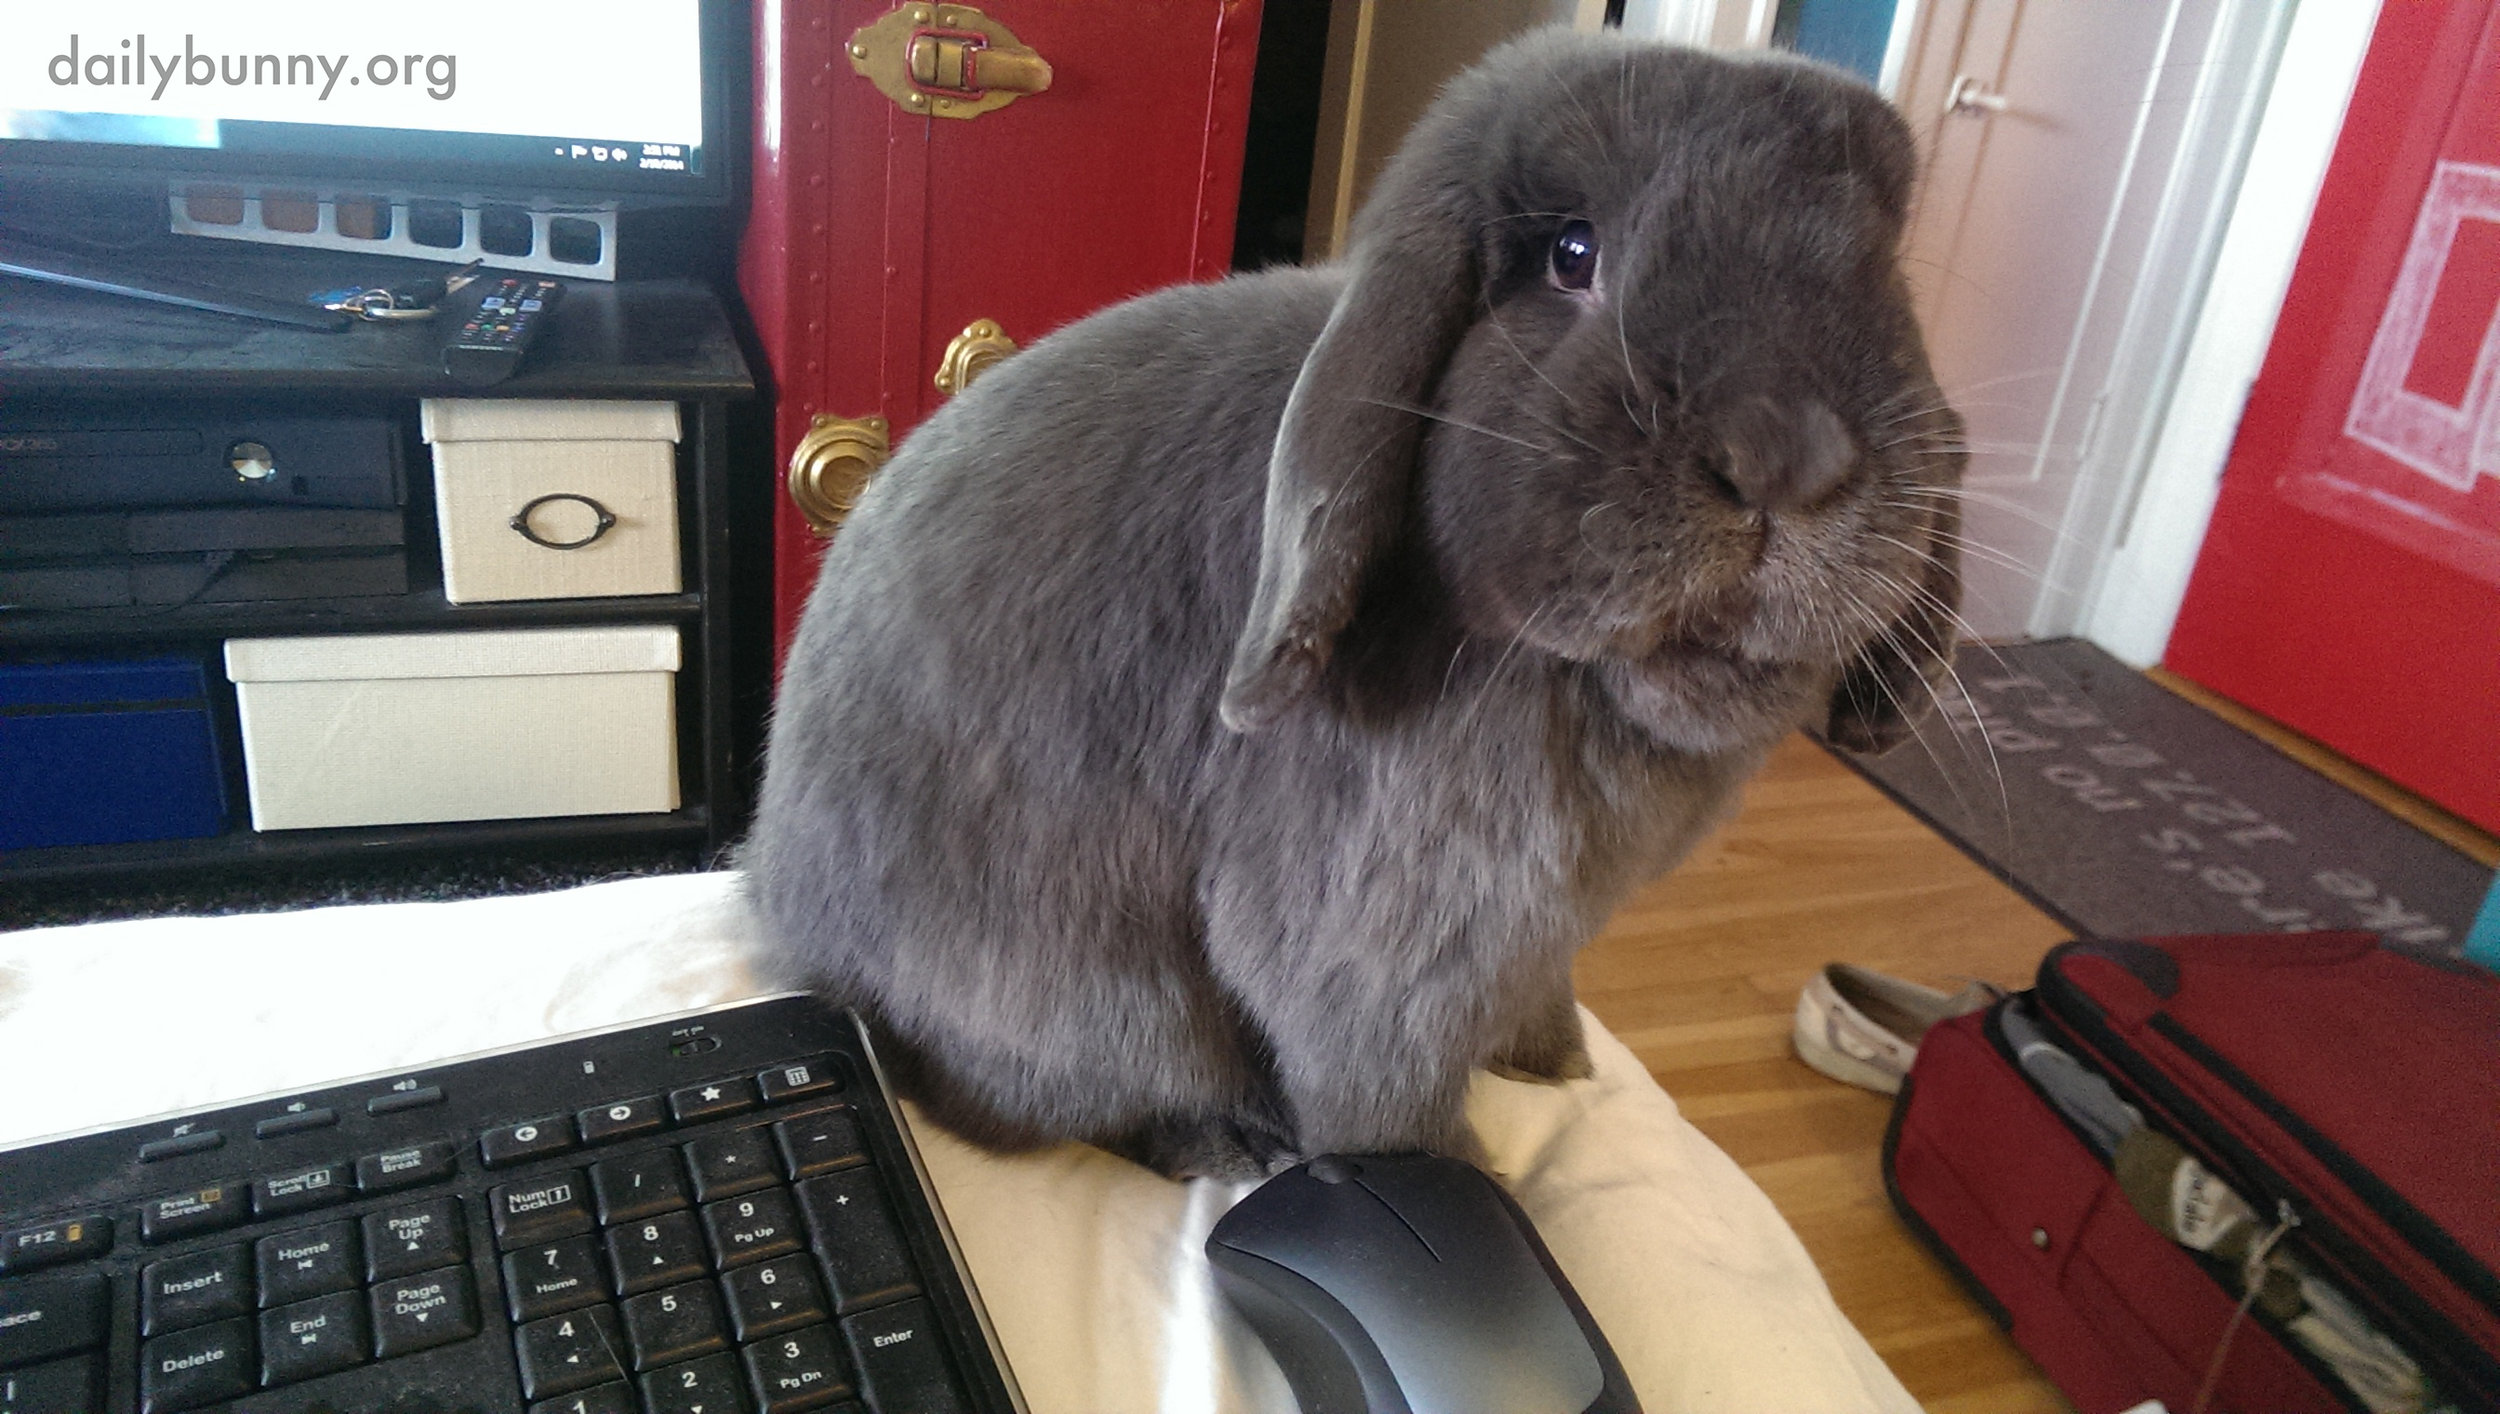 Bunny Thinks Working from Home Should Involve Frequent Treat Breaks